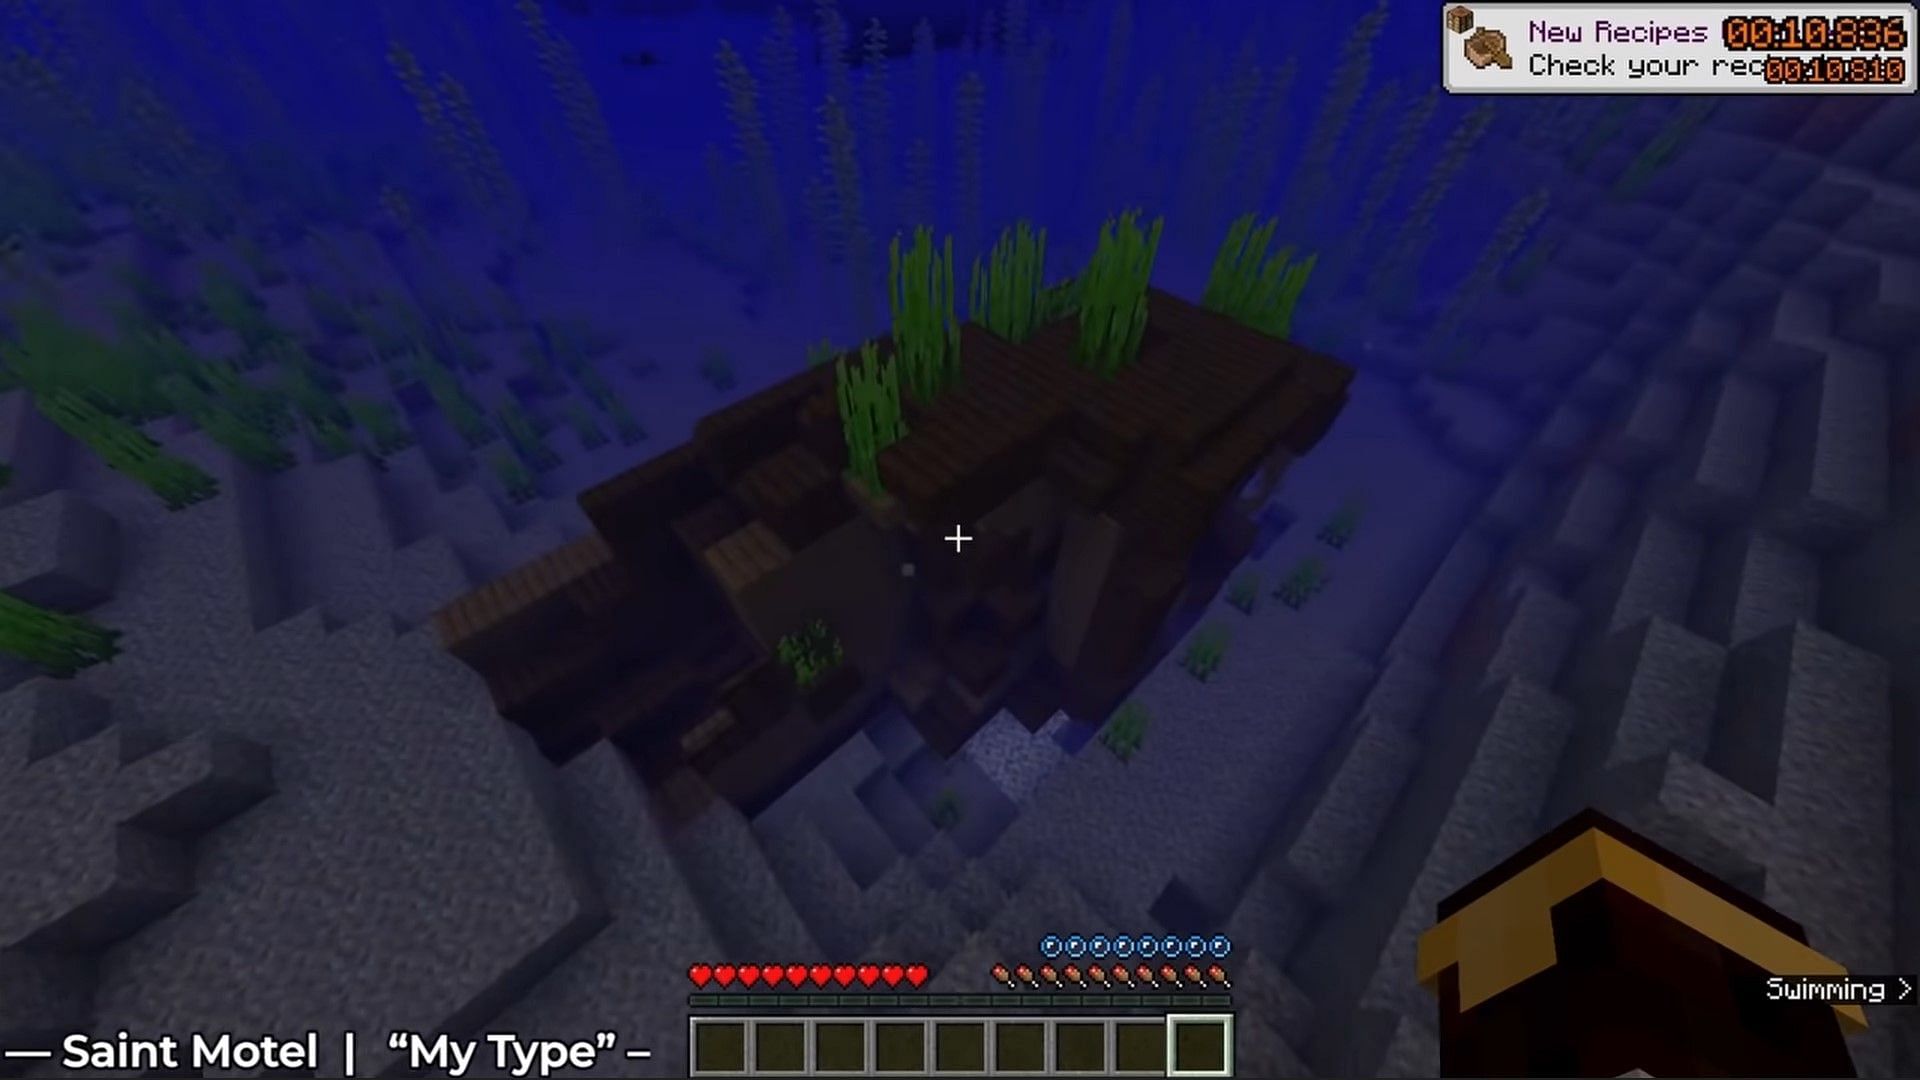 The player instantly found a shipwreck for resources (Image via YouTube/Cube1337x)